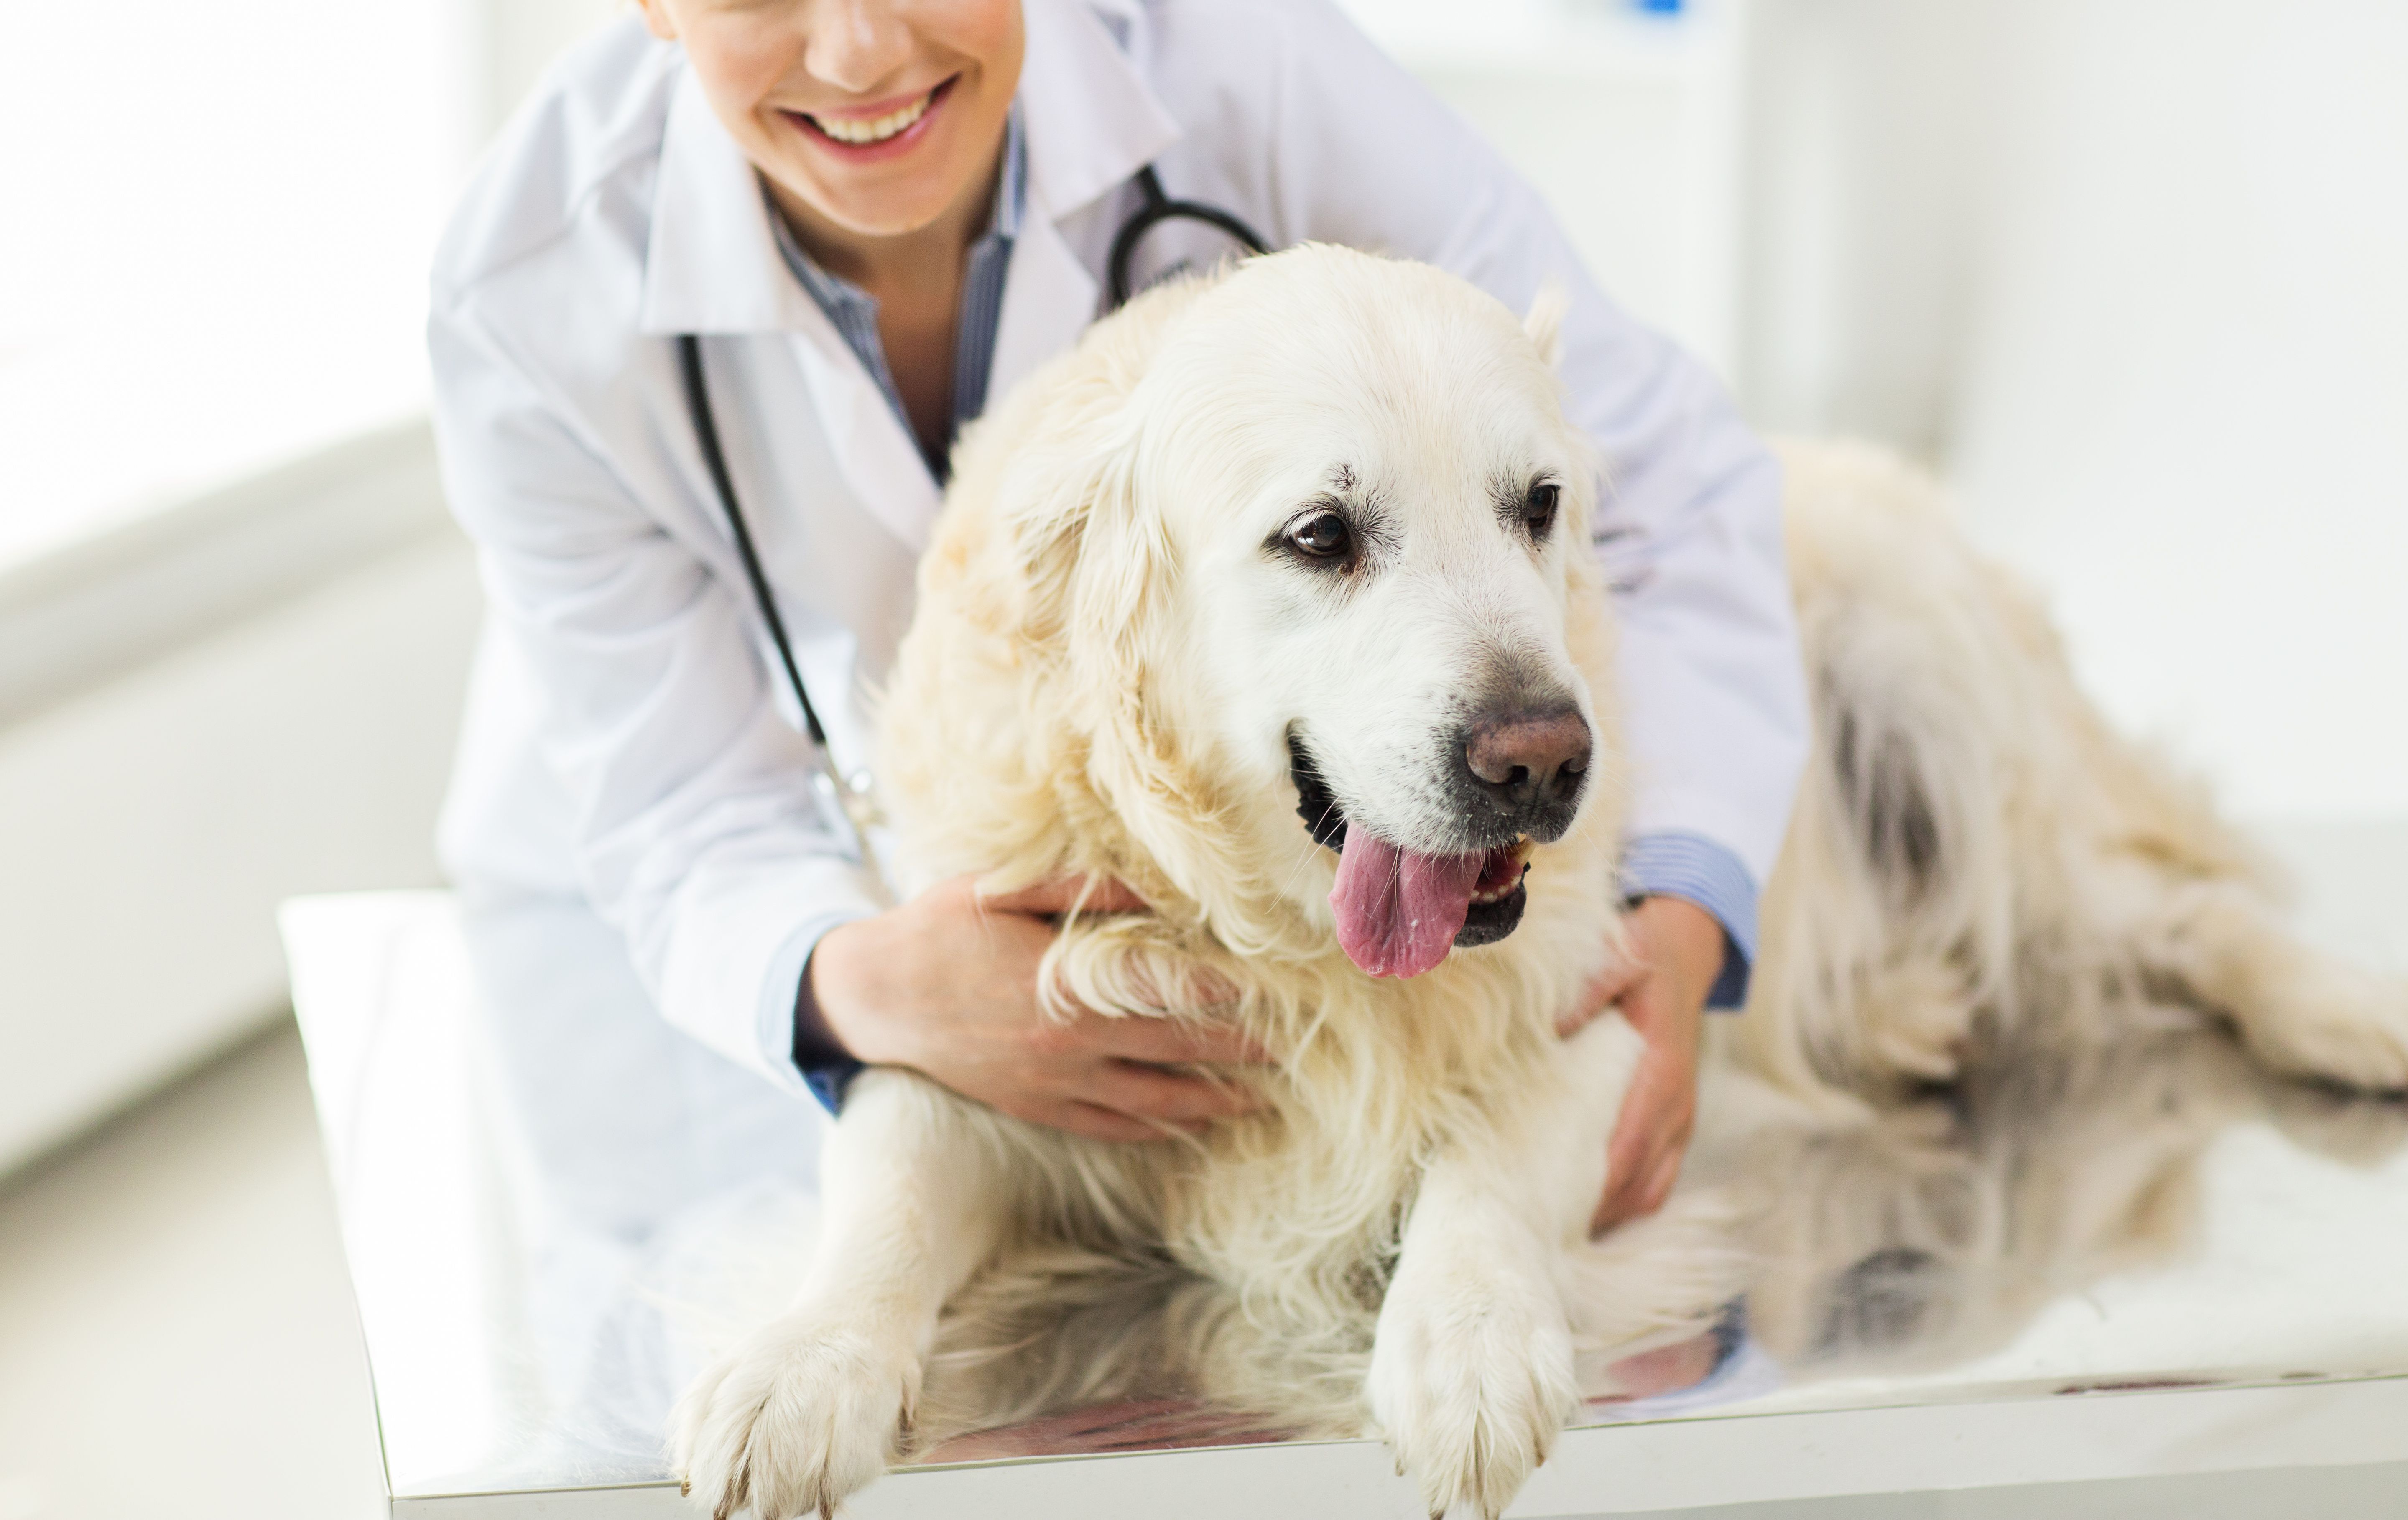 7 strategies to support work-life balance for your veterinary team